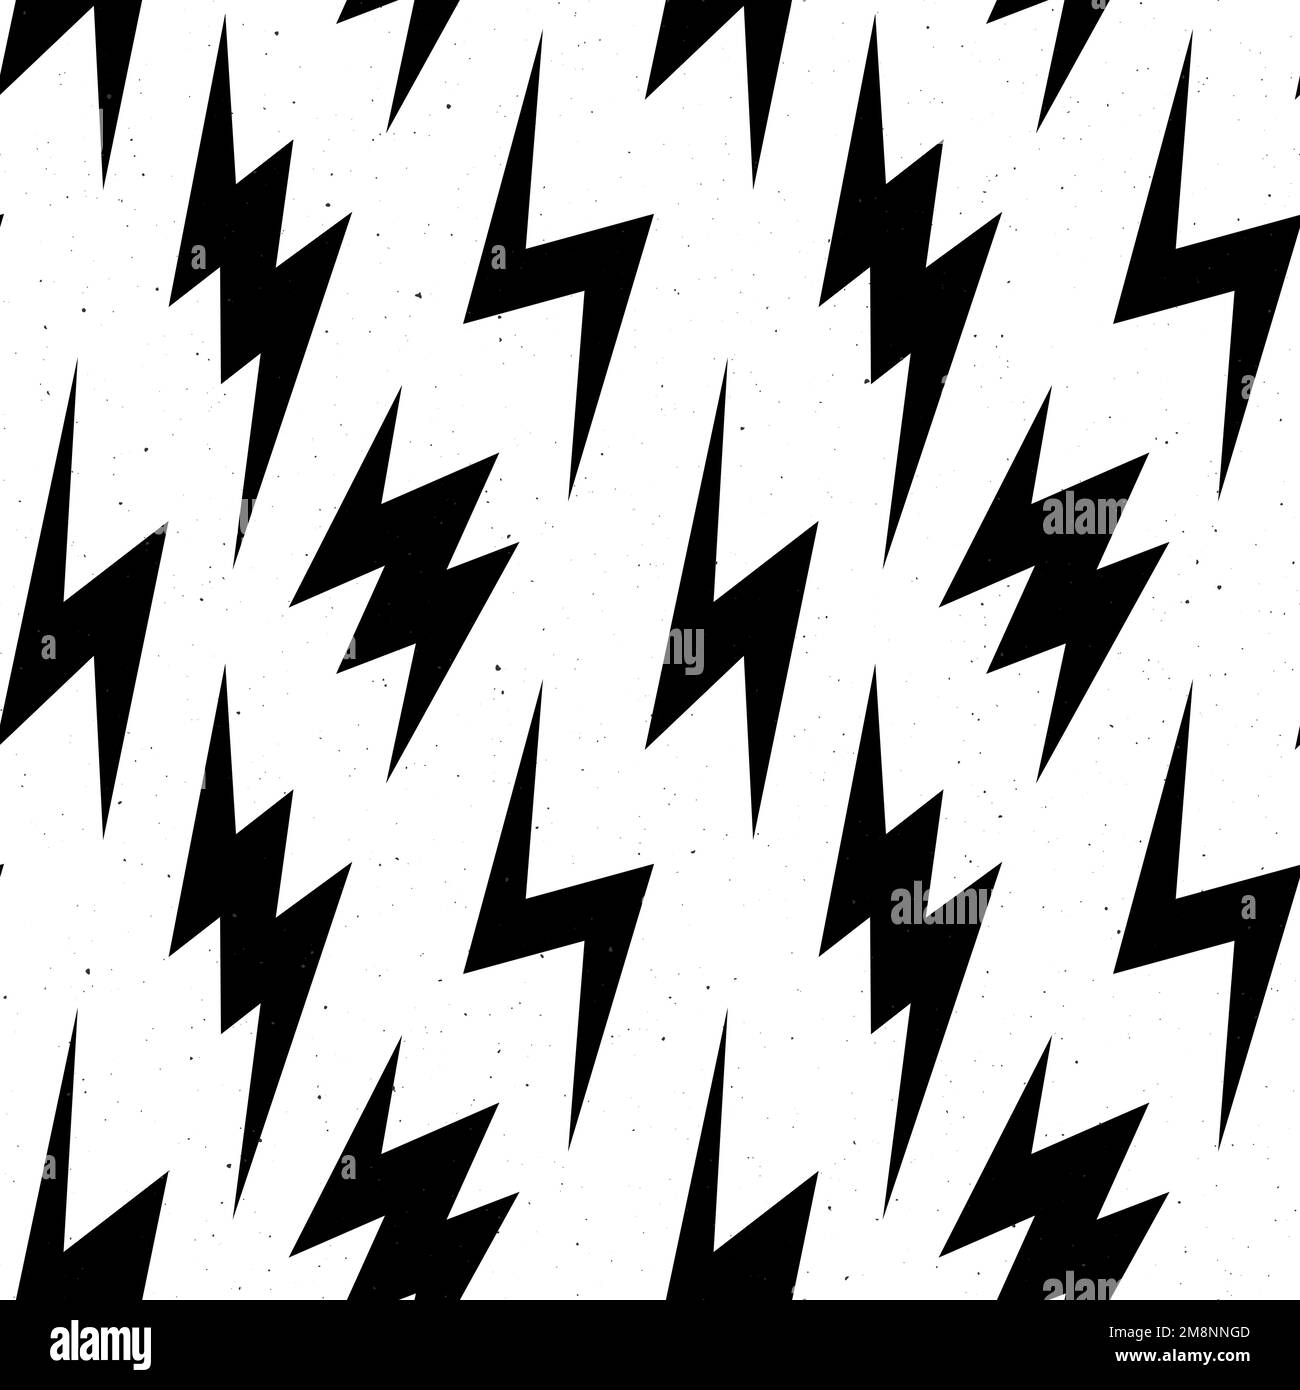 Black lightning bolts seamless pattern. Thunderbolts repeating background. Storm and lightning strikes ornament wallpaper. Energy power or electricity Stock Vector